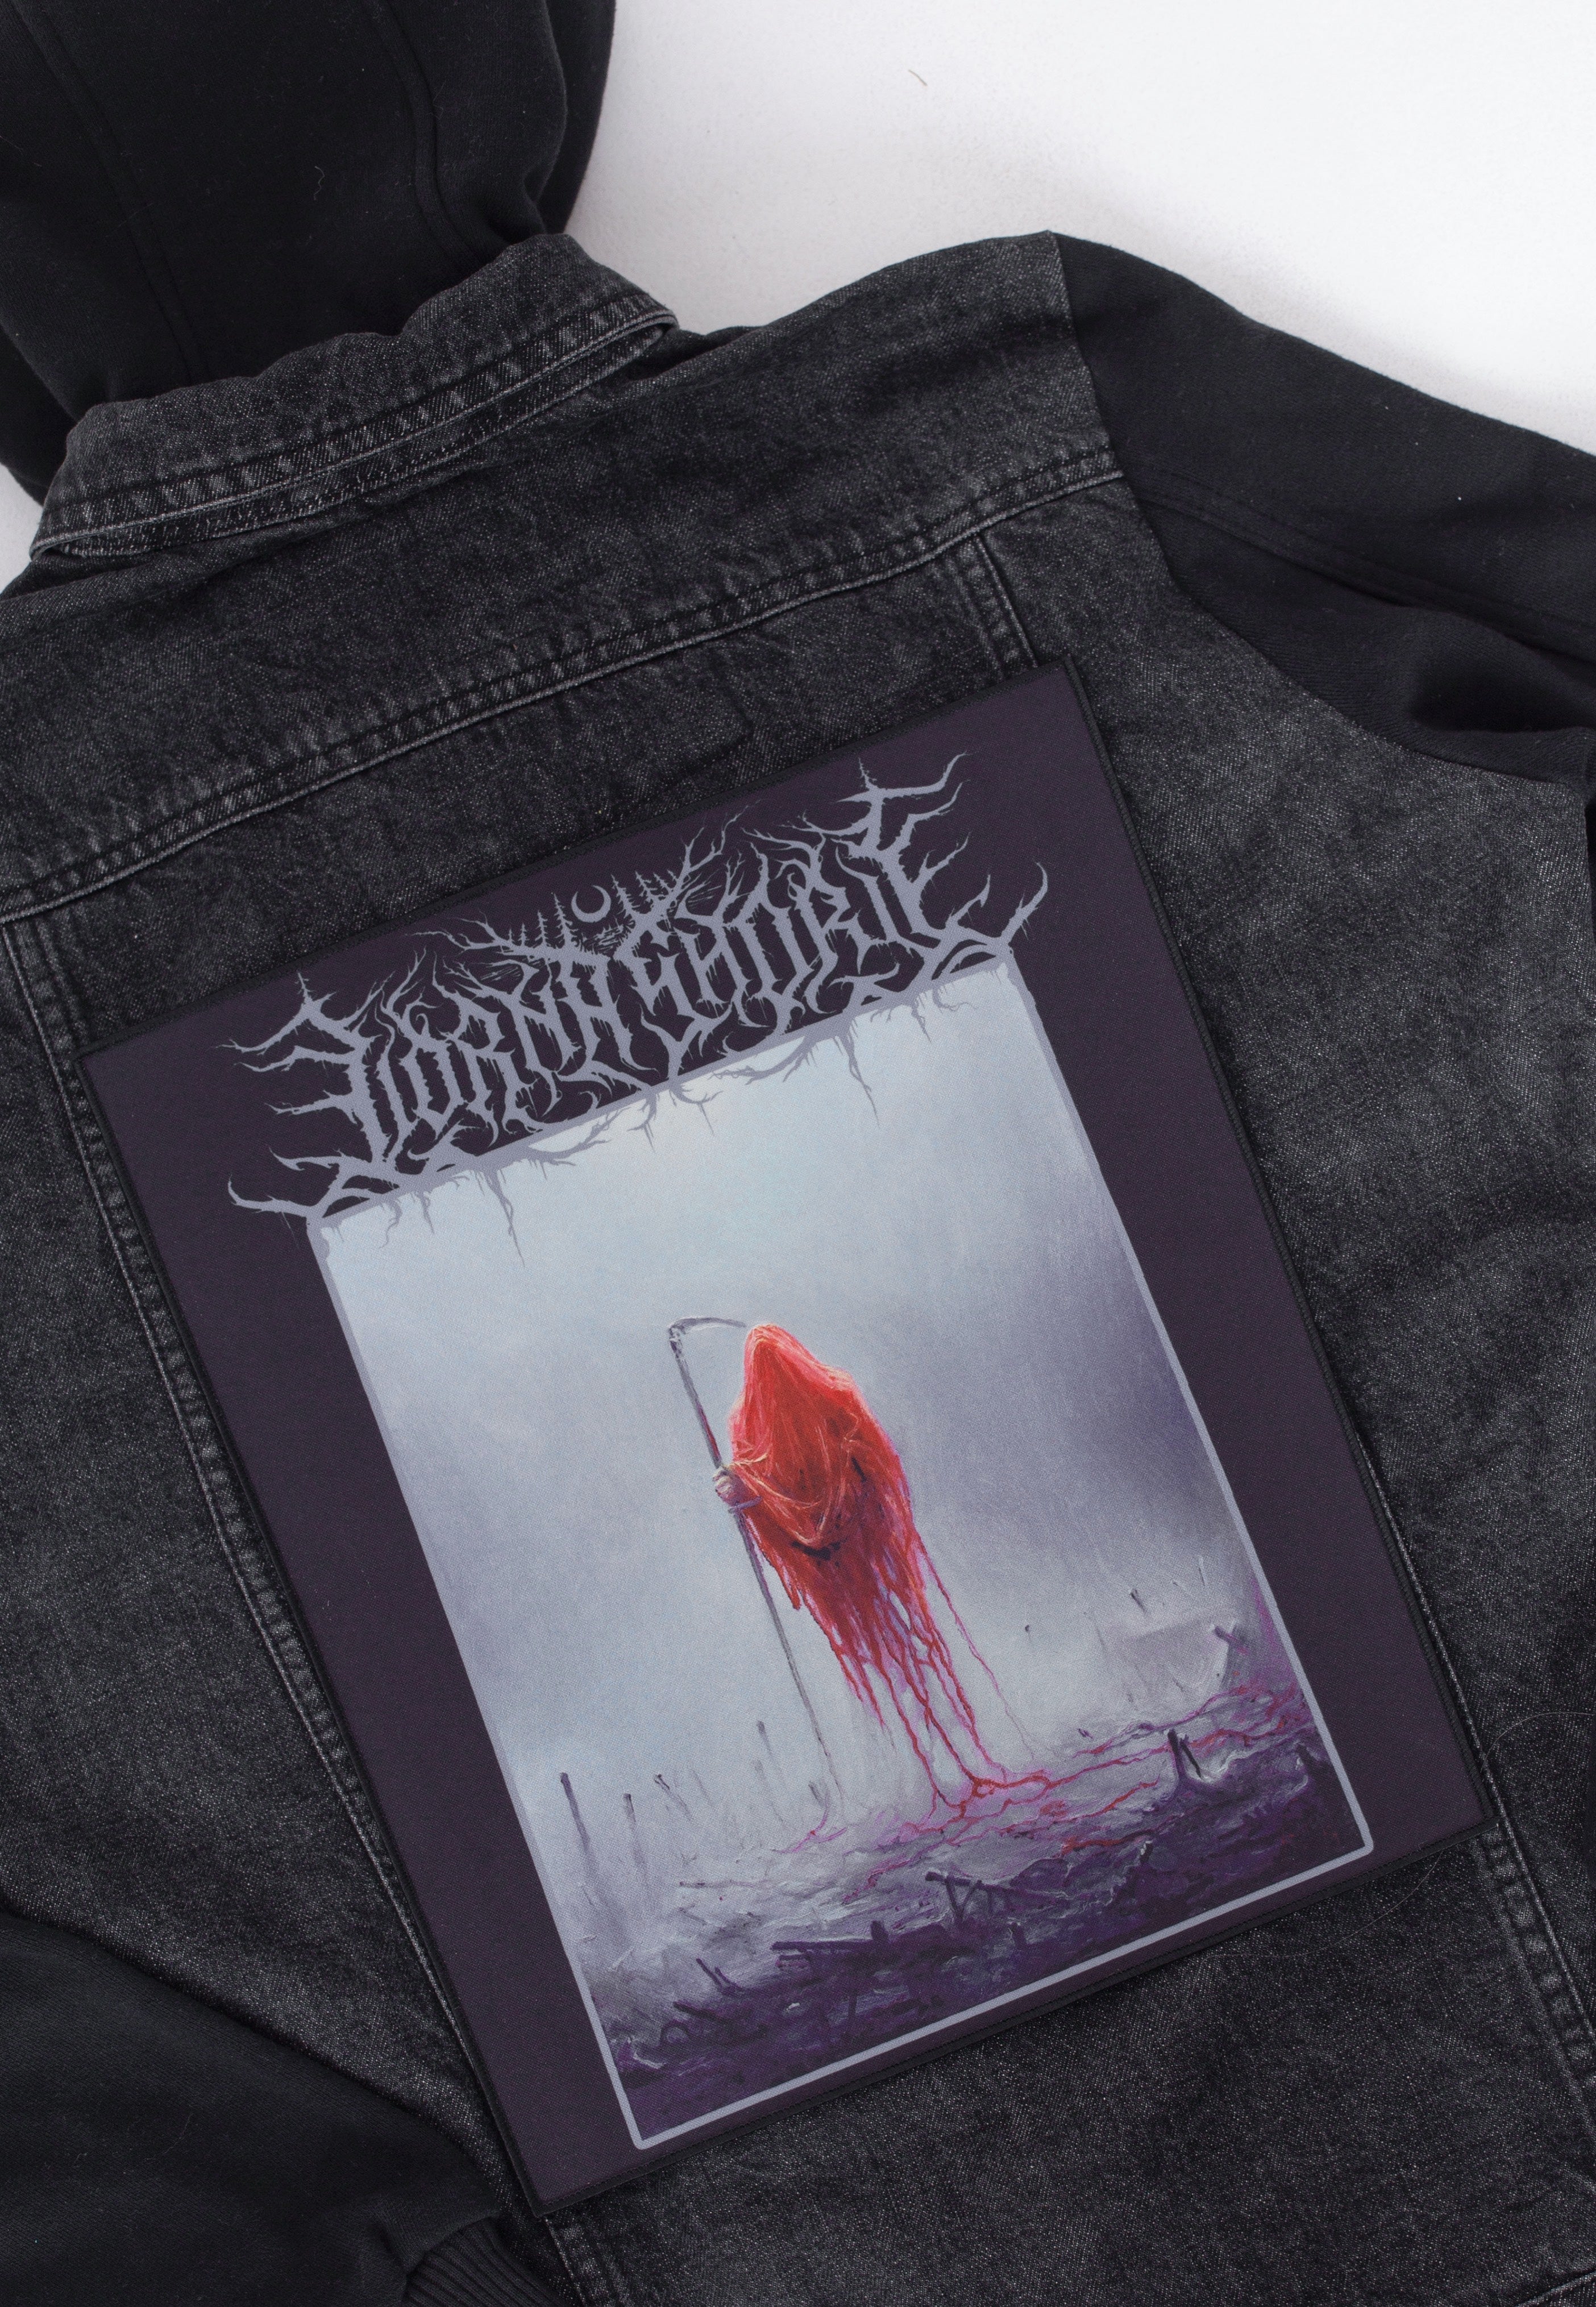 Lorna Shore - And I Return To Nothingness - Backpatch